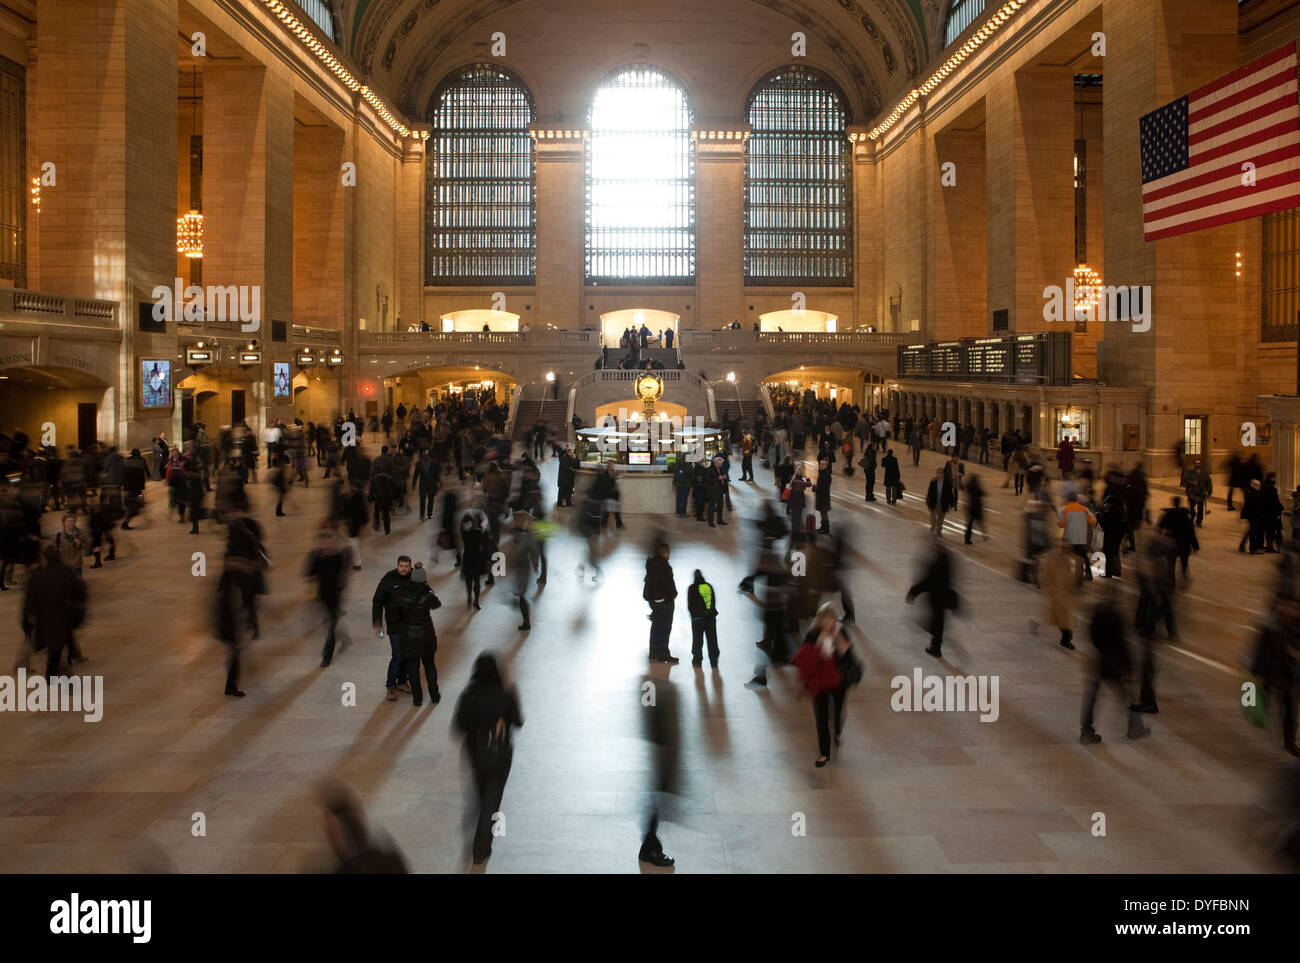 The Main Concourse of Grand Central Station or Terminal one of New York Cities most visited tourist destinations Stock Photo